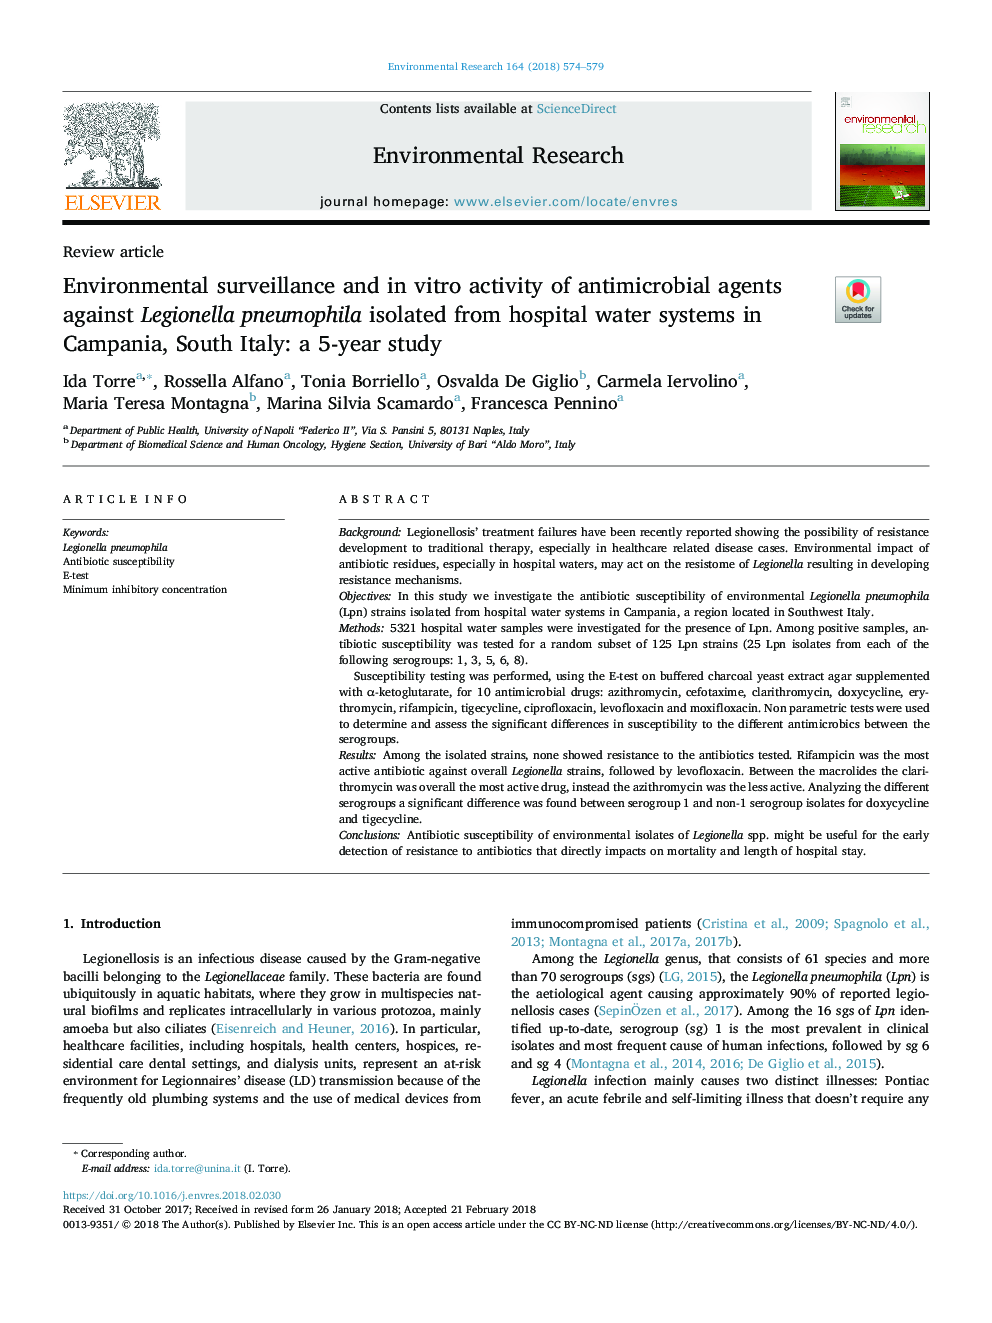 Environmental surveillance and in vitro activity of antimicrobial agents against Legionella pneumophila isolated from hospital water systems in Campania, South Italy: a 5-year study